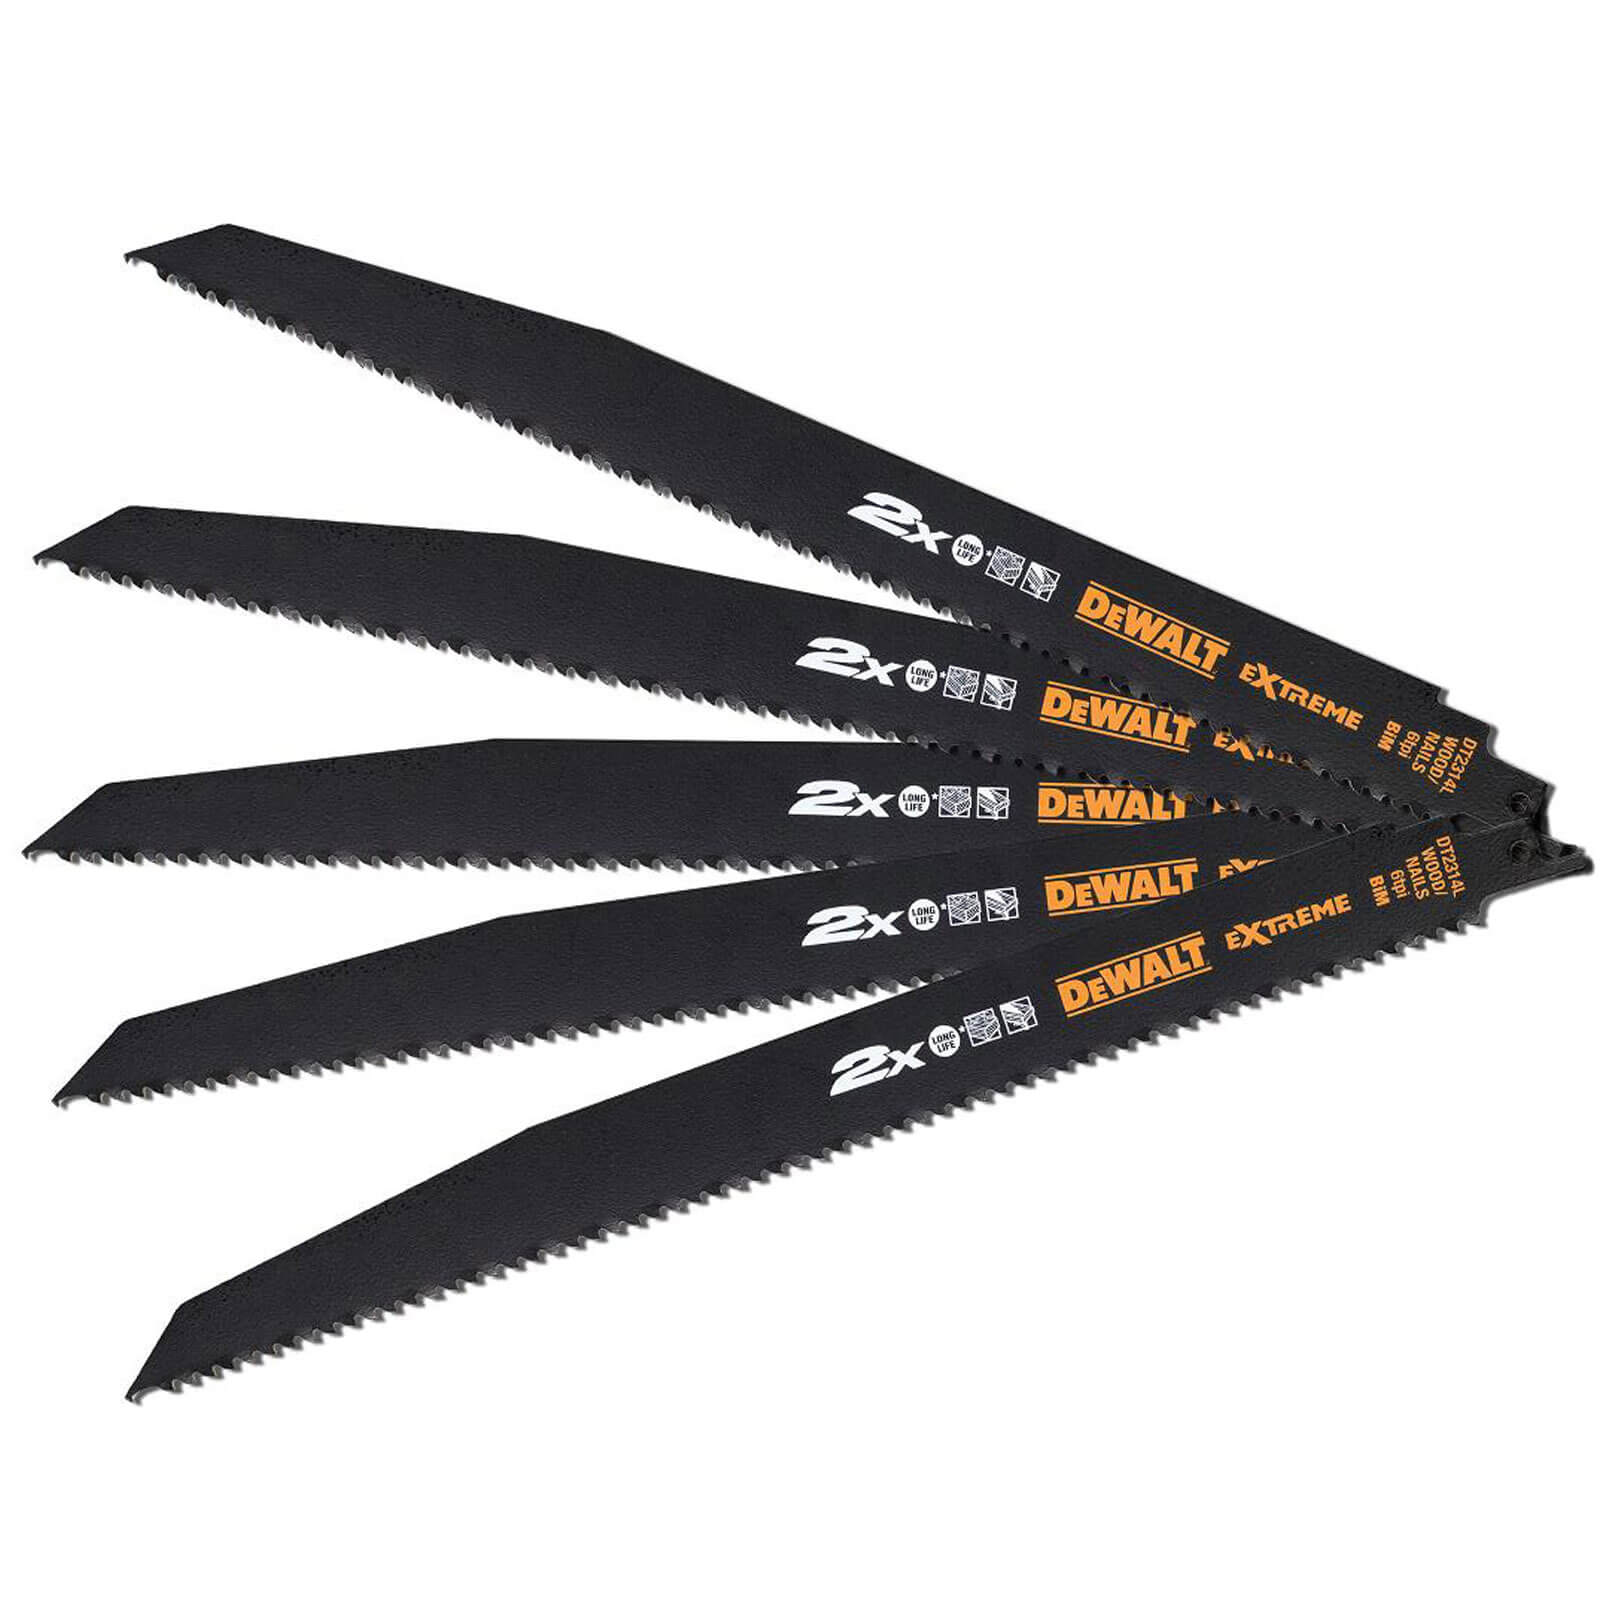 Photos - Power Tool Accessory DeWALT Extreme 2X Life Wood and Nails Reciprocating Sabre Saw Blades 152mm 